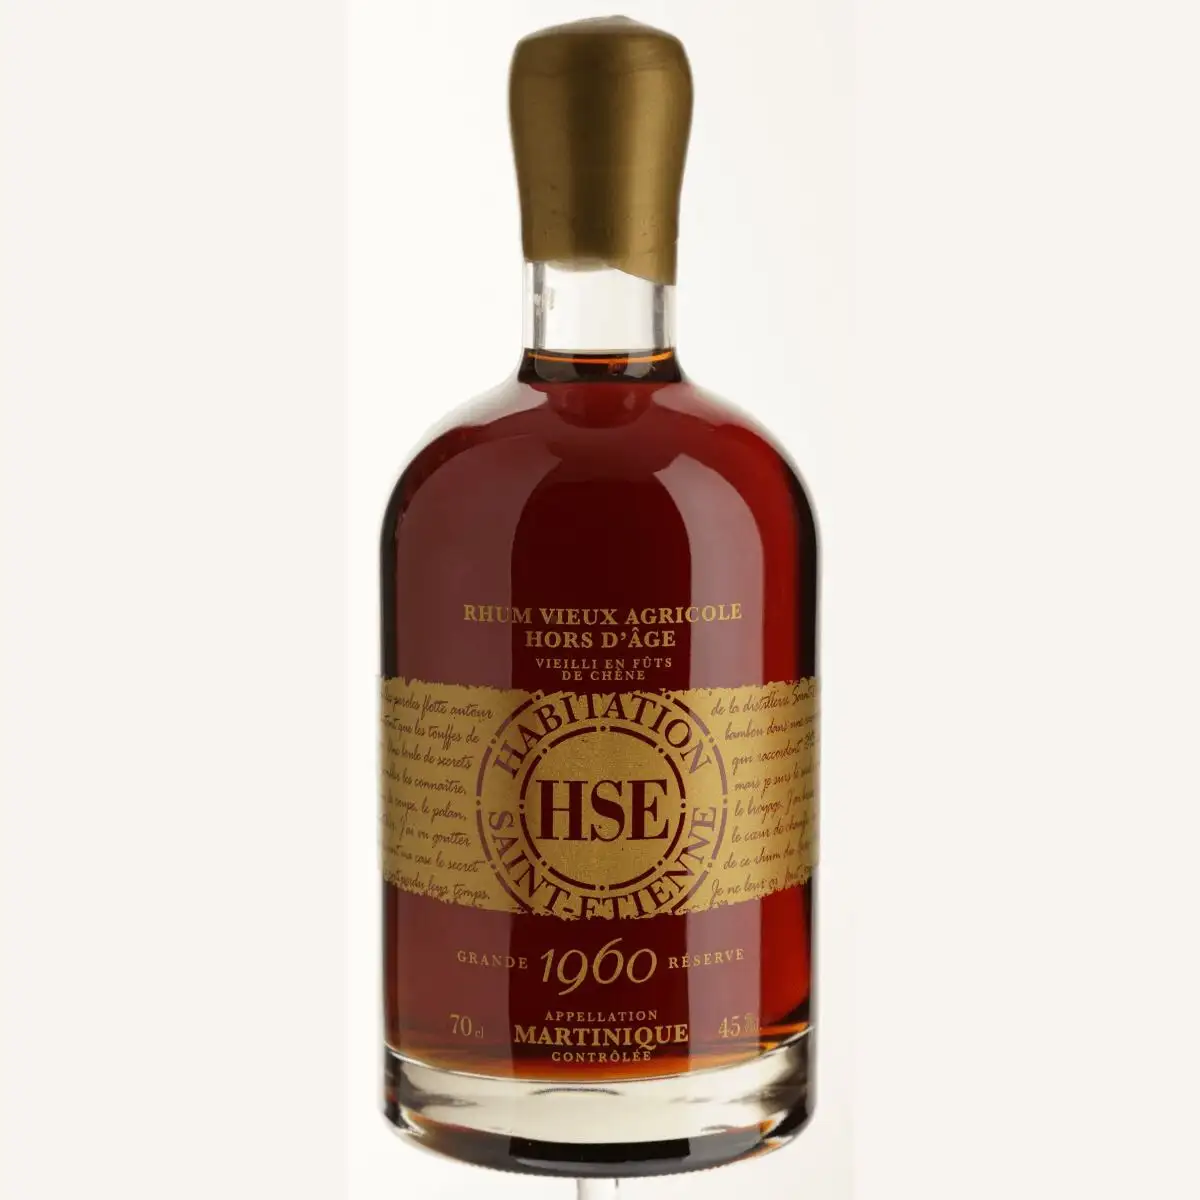 Rhum J.M 2004 Limited Edition Rum - Rated 9.0 RX12229